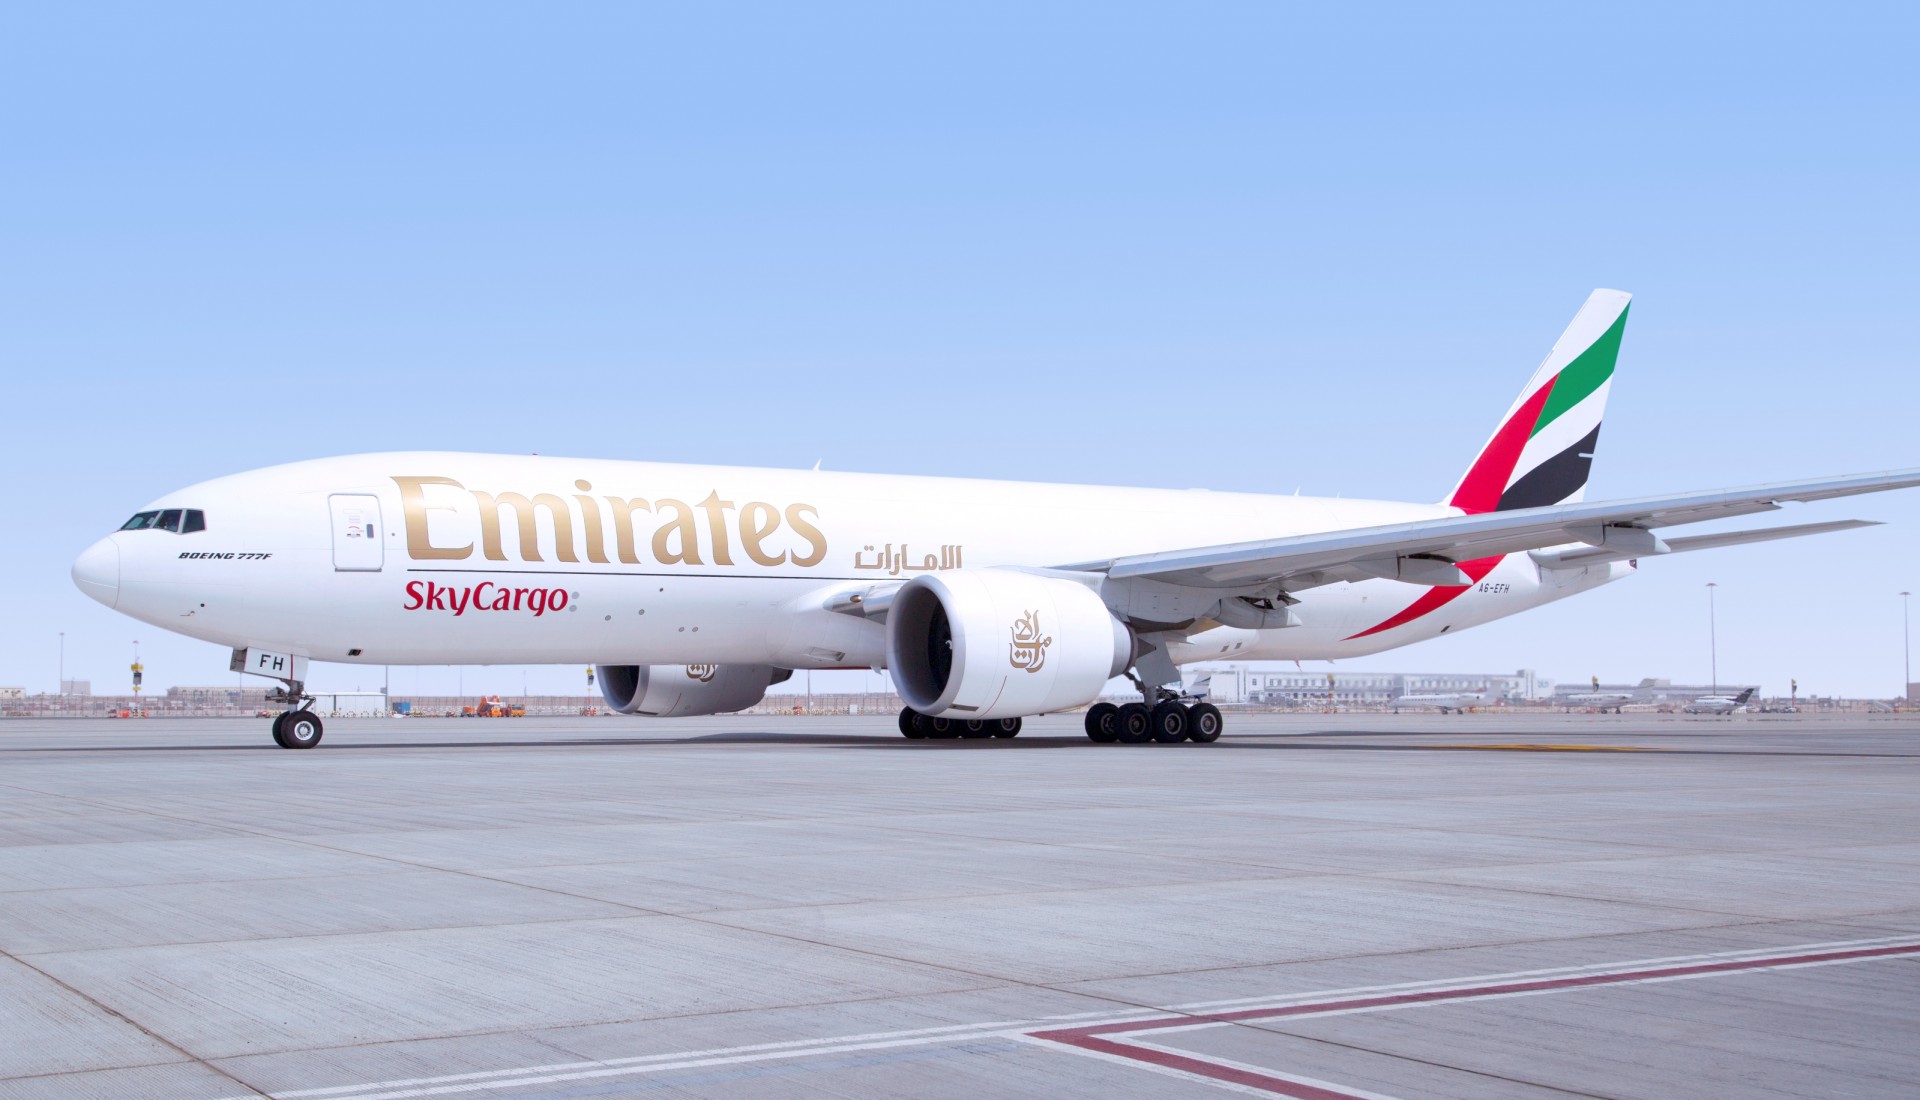 Emirates SkyCargo opens “mini-cargo” charter flights on the airplanes Airbus A380. Part 2